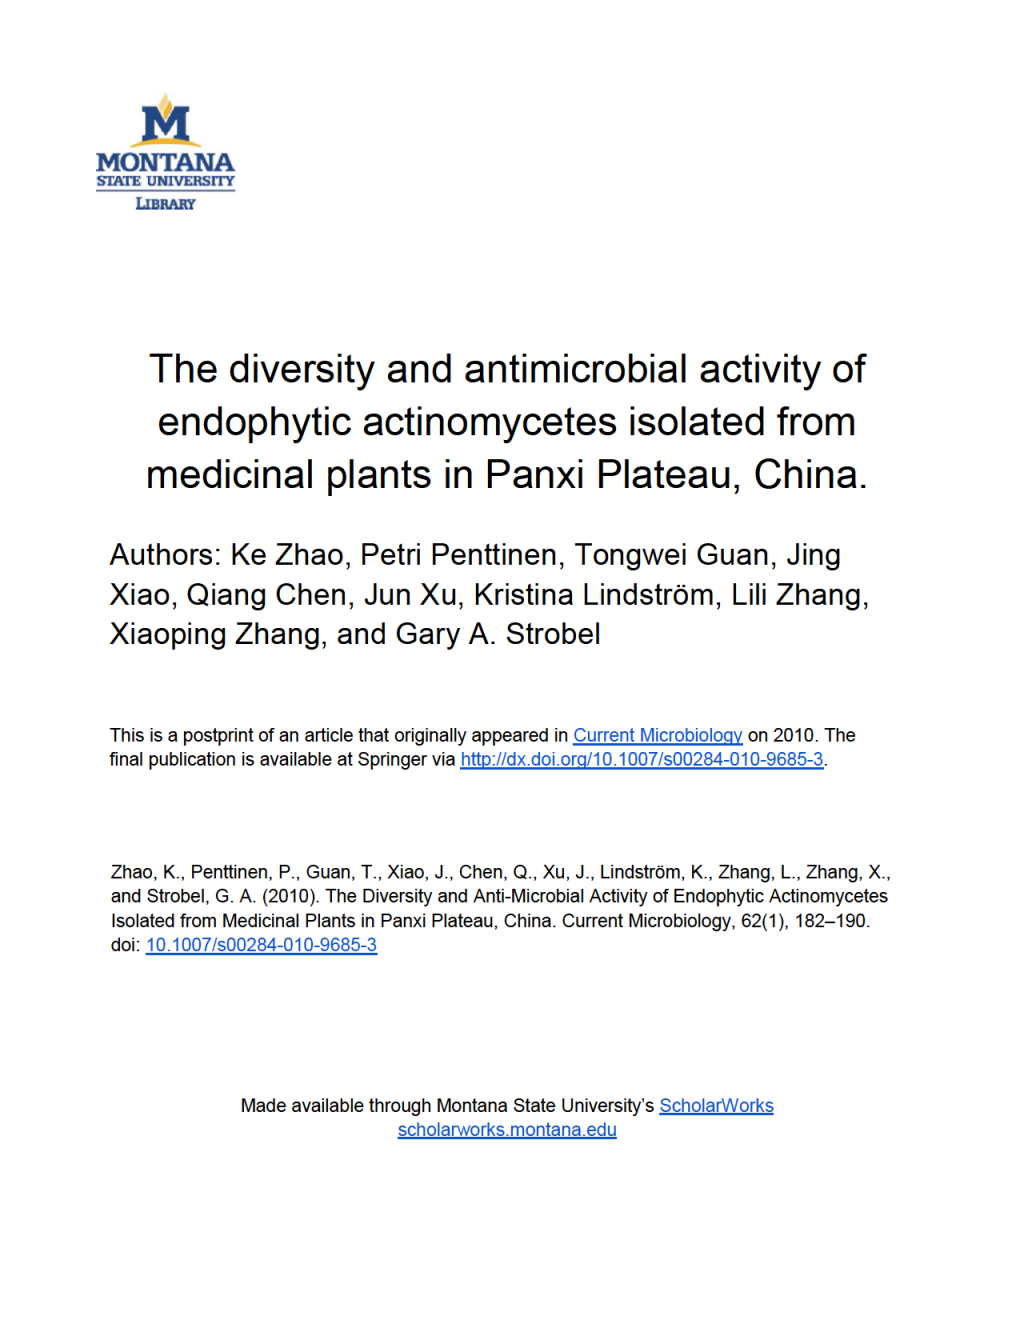 The Diversity and Antimicrobial Activity of Endophytic Actinomycetes Isolated from Medicinal Plants in Panxi Plateau, China